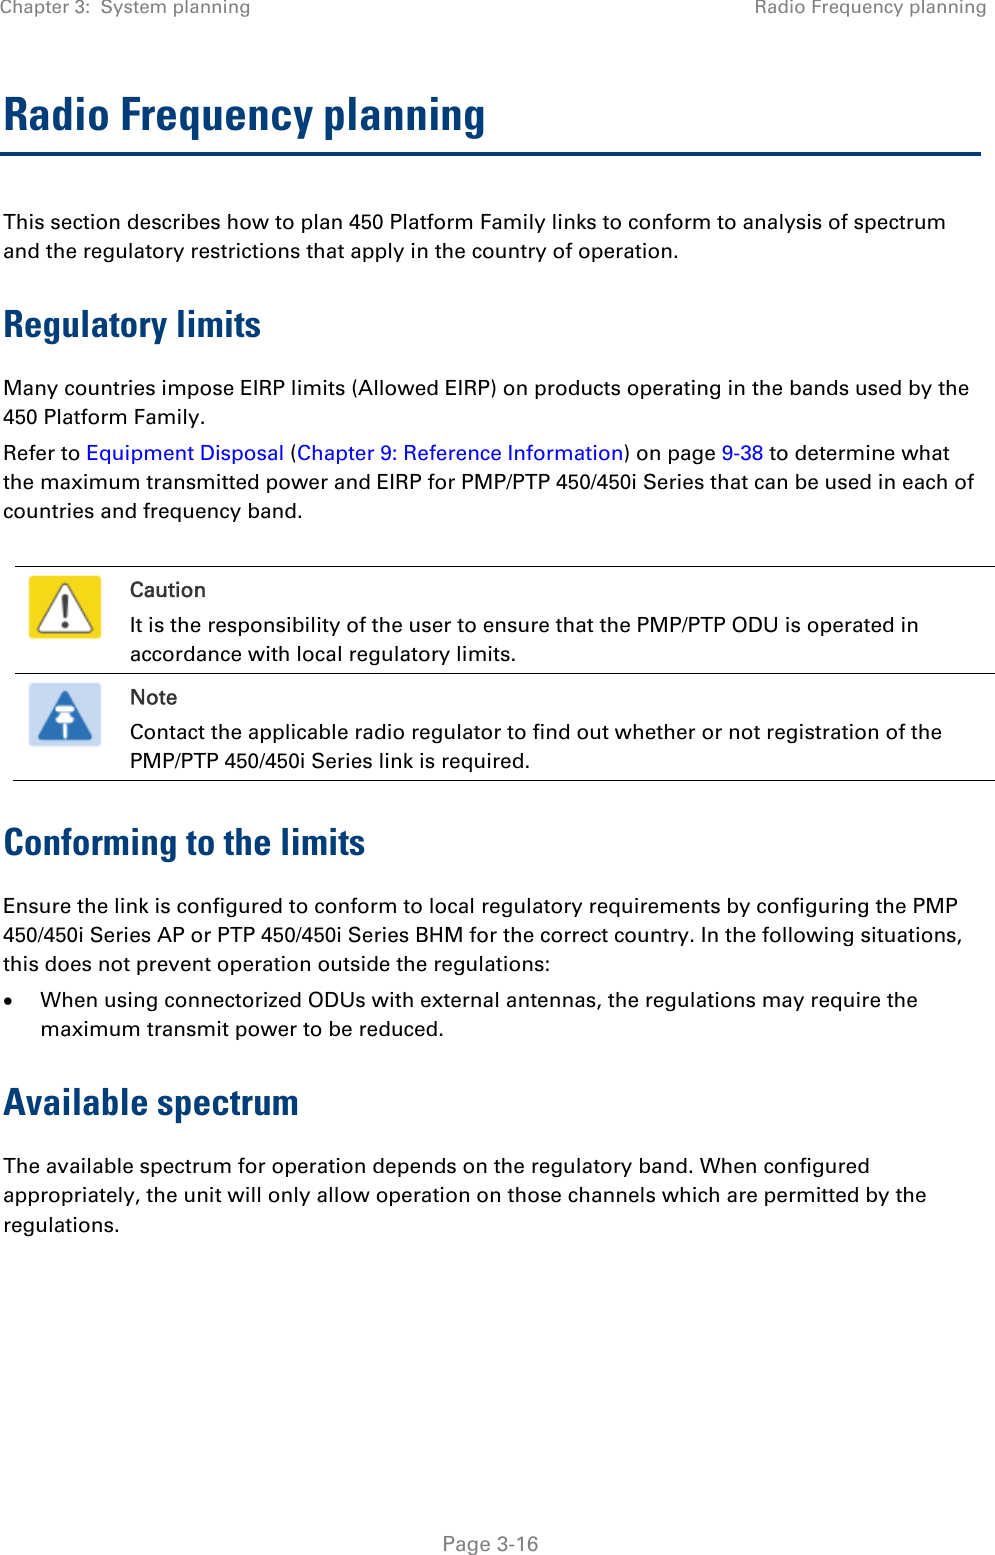 Chapter 3:  System planning  Radio Frequency planning   Page 3-16 Radio Frequency planning This section describes how to plan 450 Platform Family links to conform to analysis of spectrum and the regulatory restrictions that apply in the country of operation. Regulatory limits Many countries impose EIRP limits (Allowed EIRP) on products operating in the bands used by the 450 Platform Family.  Refer to Equipment Disposal (Chapter 9: Reference Information) on page 9-38 to determine what the maximum transmitted power and EIRP for PMP/PTP 450/450i Series that can be used in each of countries and frequency band.   Caution It is the responsibility of the user to ensure that the PMP/PTP ODU is operated in accordance with local regulatory limits.  Note Contact the applicable radio regulator to find out whether or not registration of the PMP/PTP 450/450i Series link is required. Conforming to the limits Ensure the link is configured to conform to local regulatory requirements by configuring the PMP 450/450i Series AP or PTP 450/450i Series BHM for the correct country. In the following situations, this does not prevent operation outside the regulations:  When using connectorized ODUs with external antennas, the regulations may require the maximum transmit power to be reduced. Available spectrum The available spectrum for operation depends on the regulatory band. When configured appropriately, the unit will only allow operation on those channels which are permitted by the regulations.     